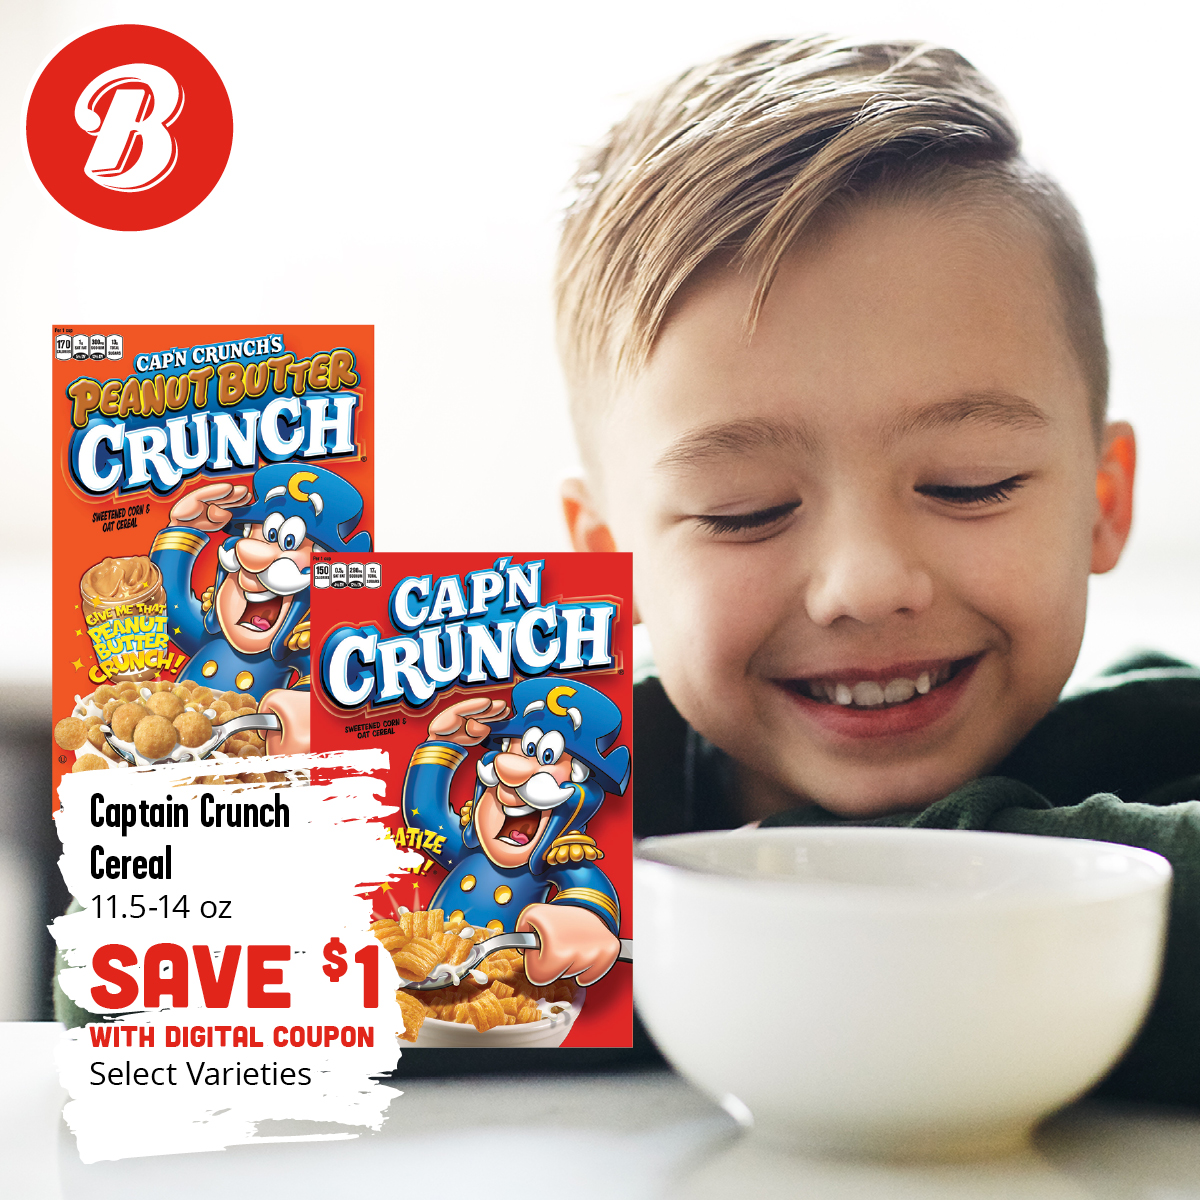 Save $1 this week on Captain Crunch with our digital coupon.